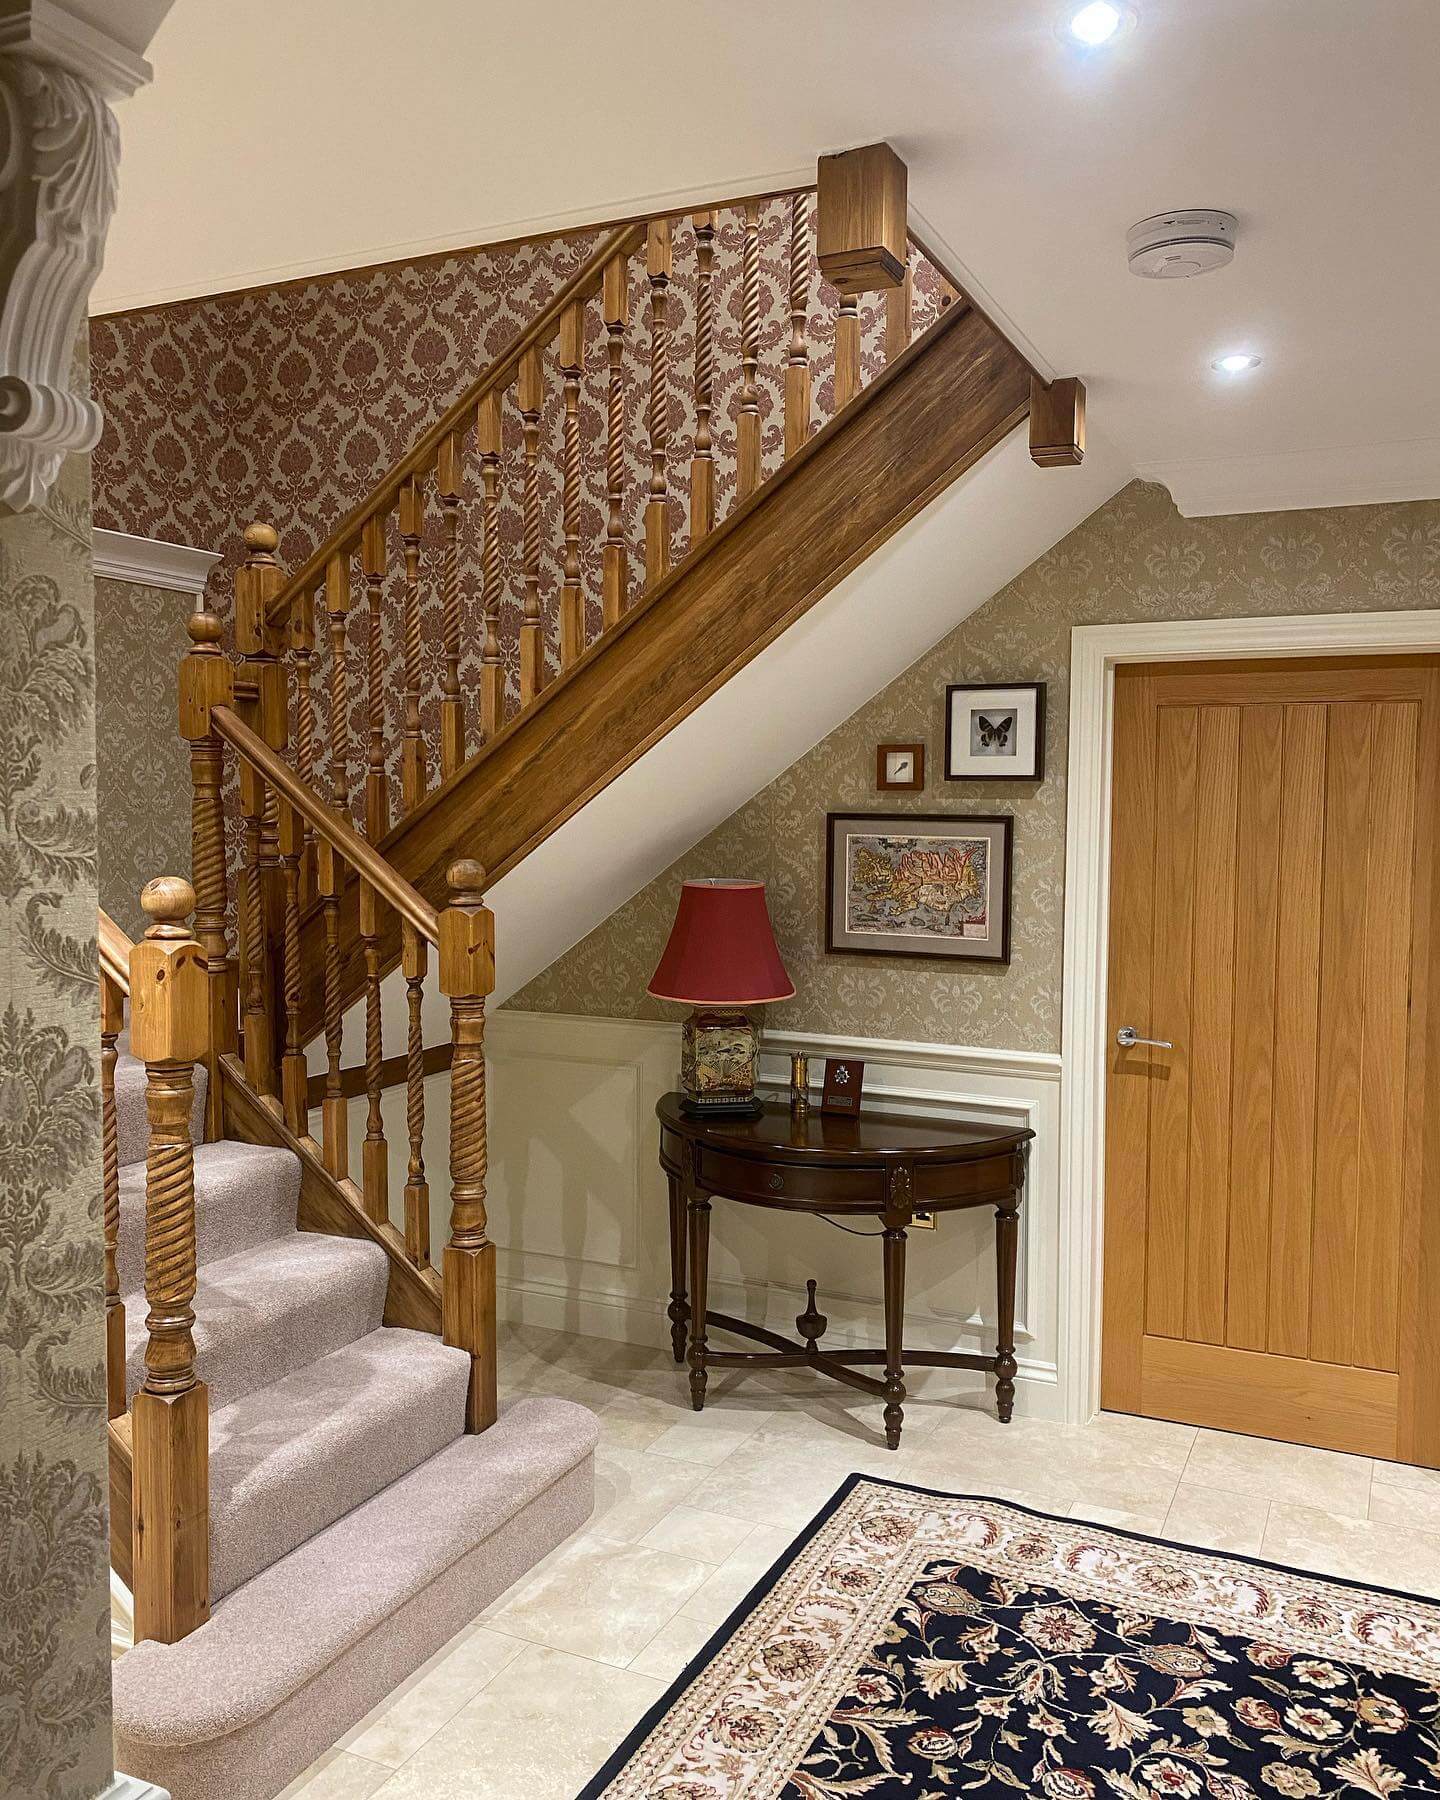 Hall, Stairs & Landing full redecoration and papering in Headley, Hampshire.